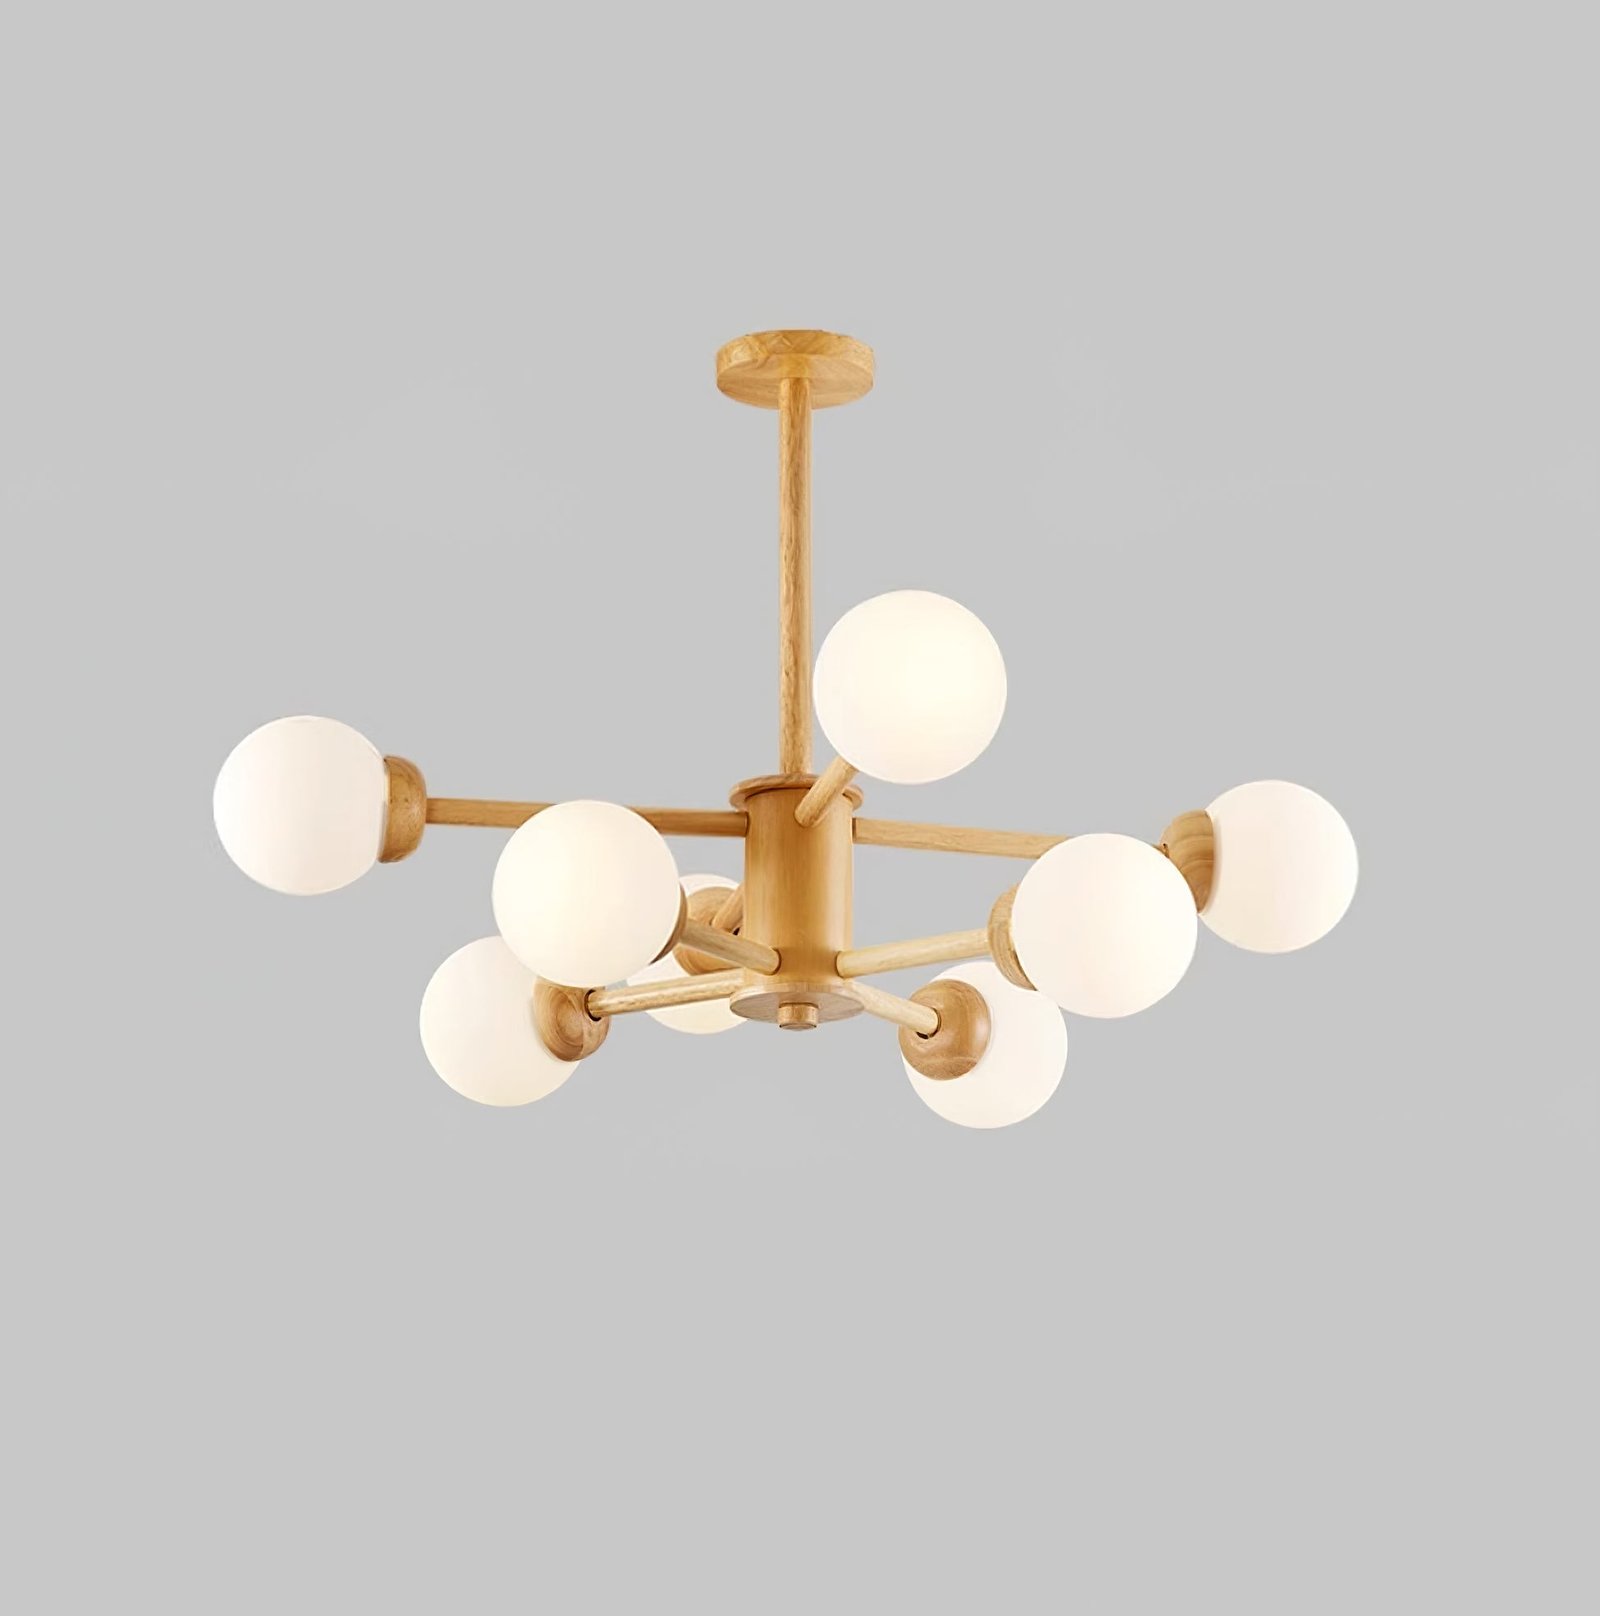 Wooden Chandelier - 8 Heads, Diameter of 34.6 inches, Height of 20 inches (88cm x 51cm), Wood and White Finish.